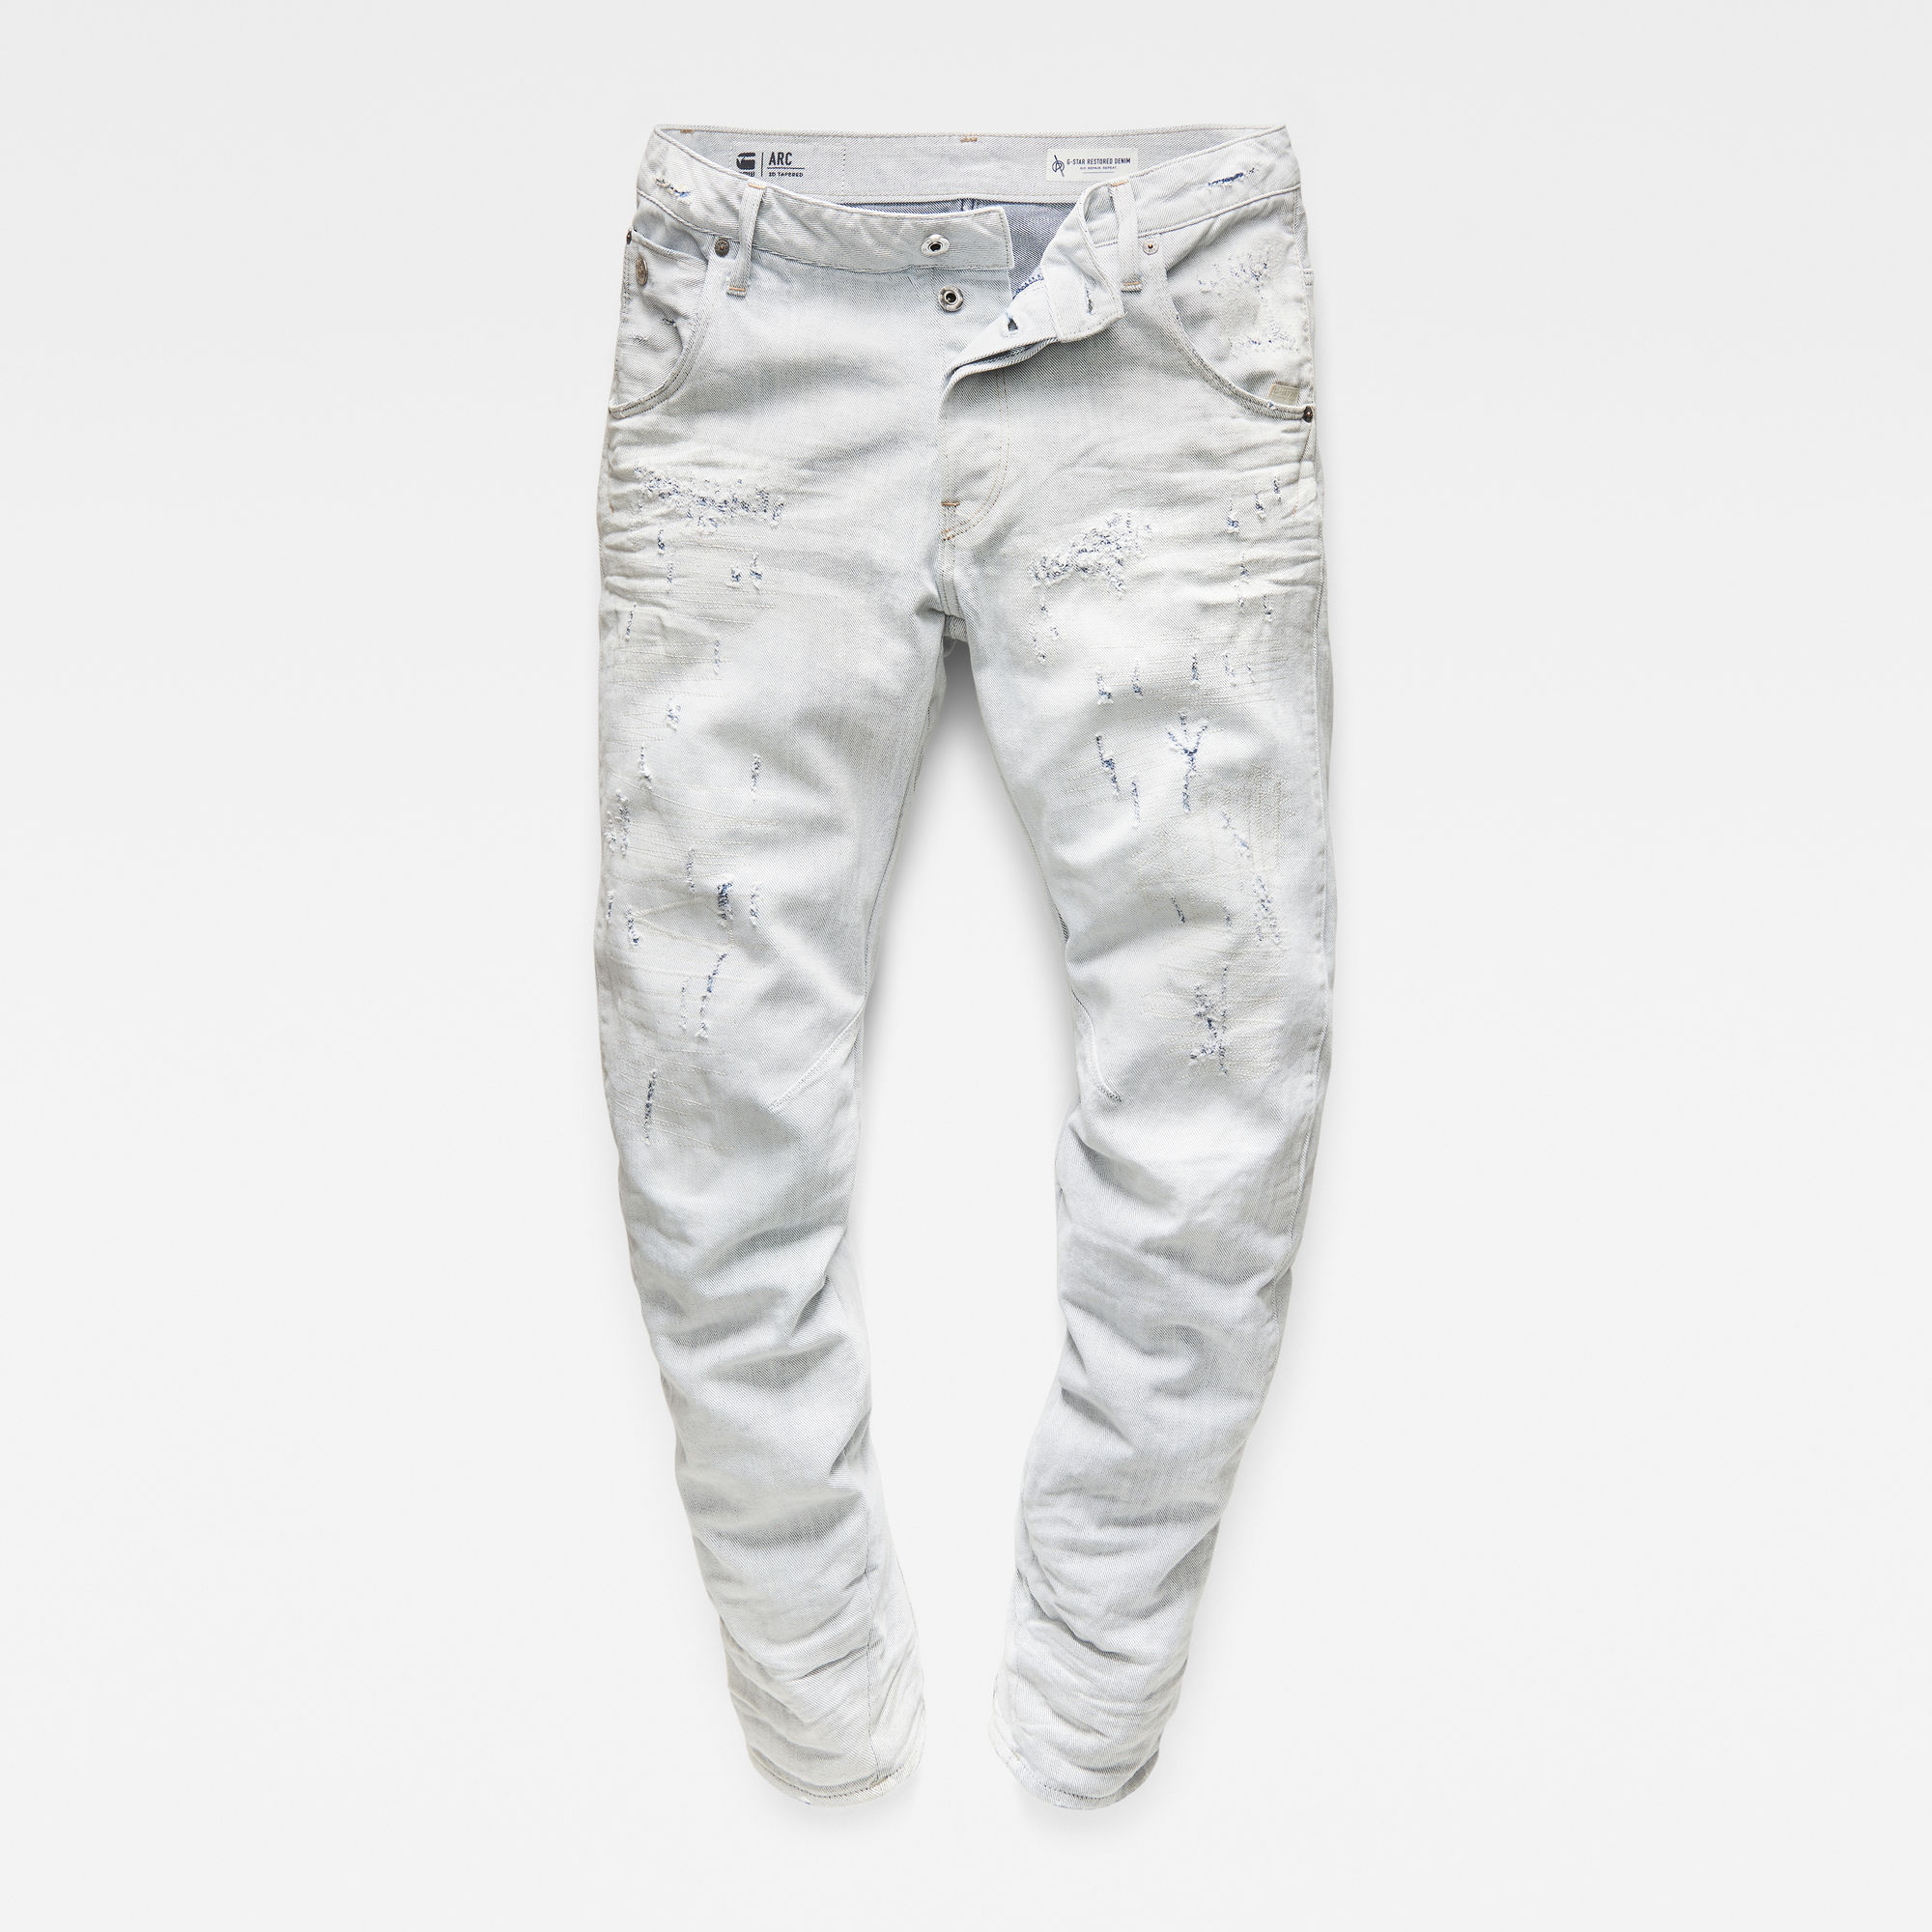 Arc 3D Tapered Jeans | White | G-Star RAW®